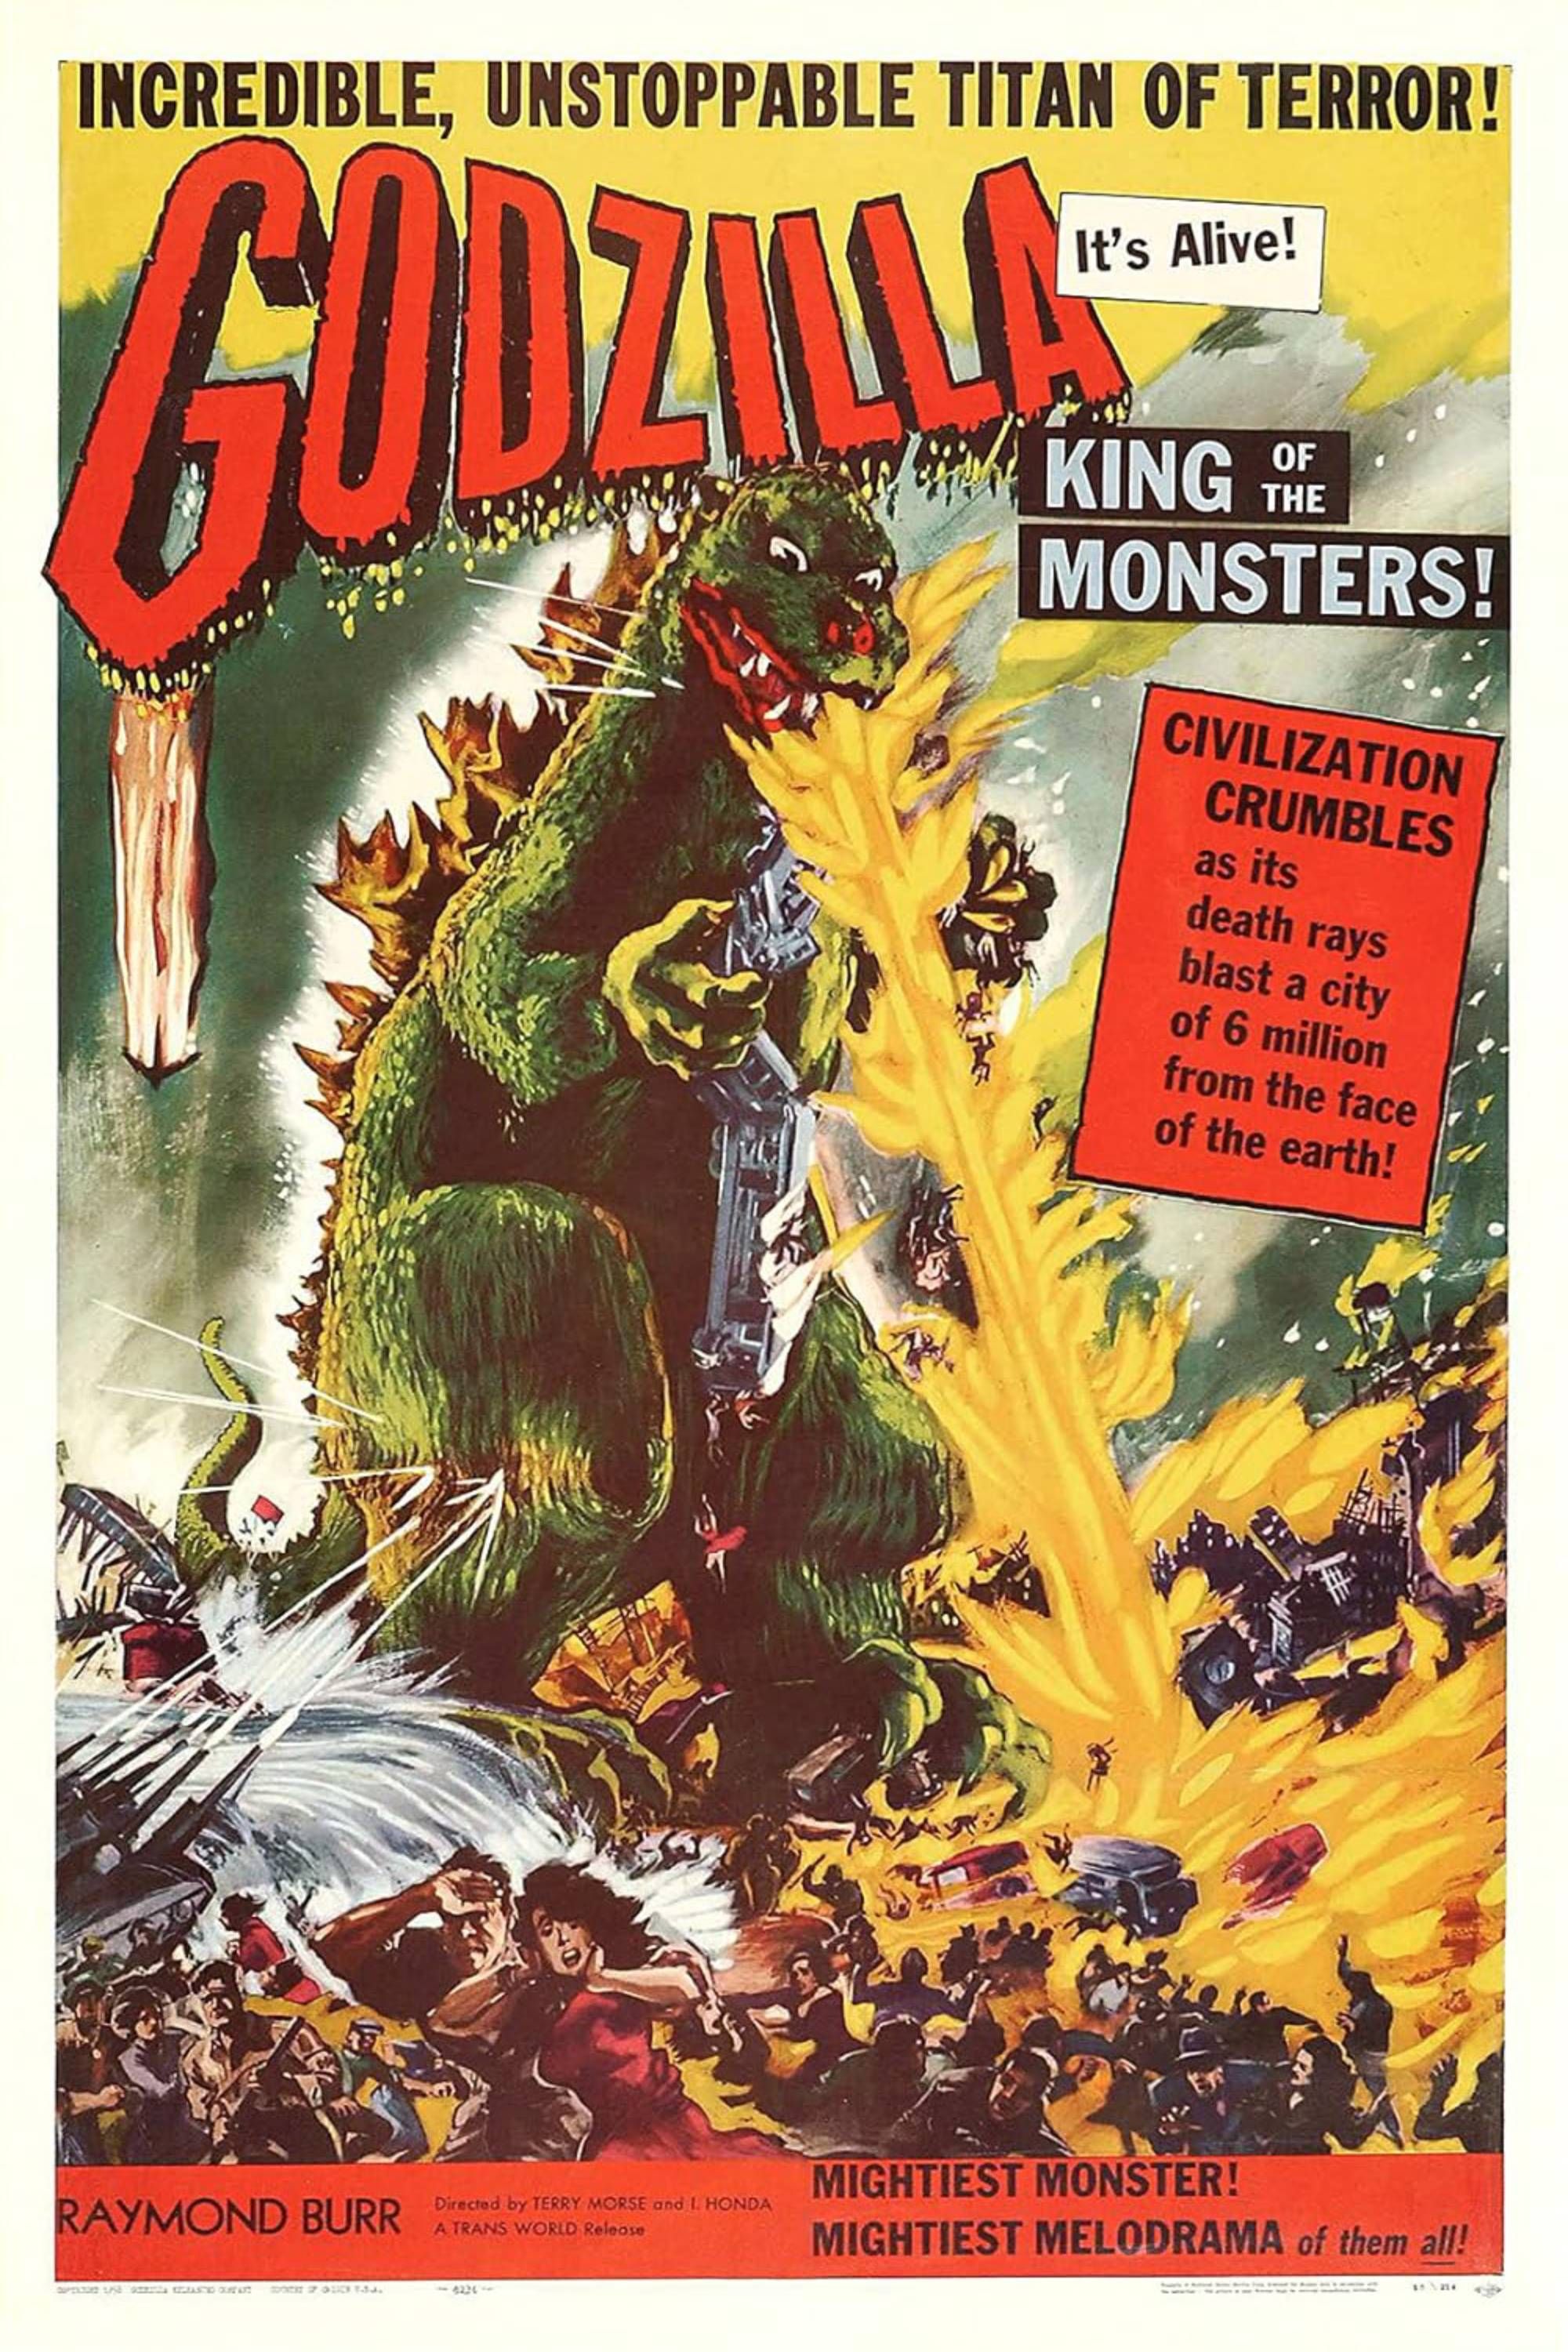 Godzilla, King of the Monsters! (1956) - Poster